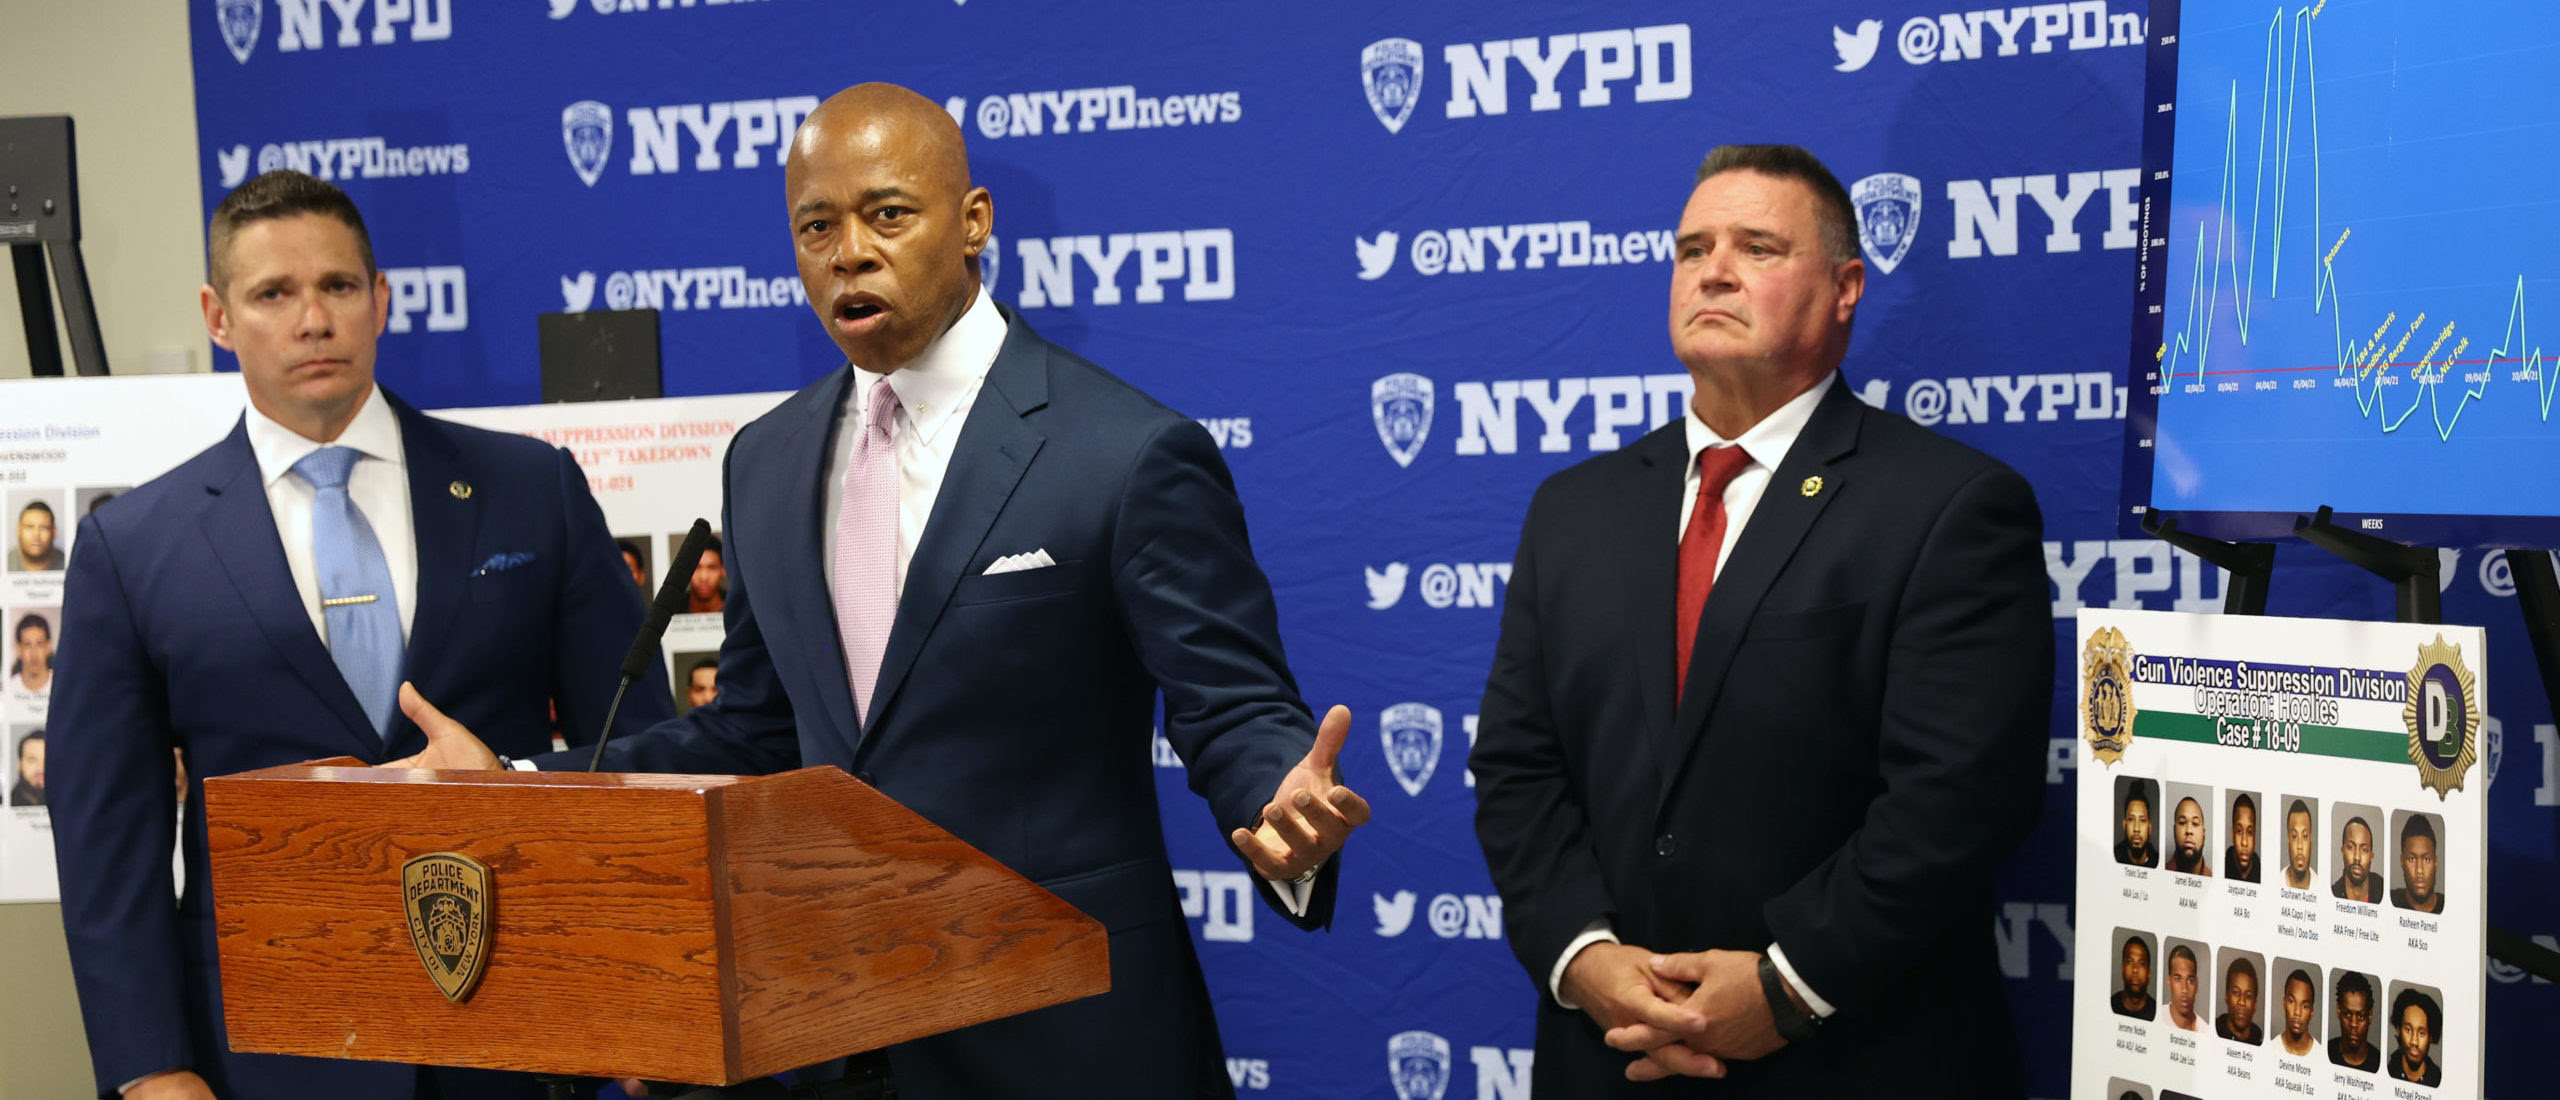 Pro-Police, Tough-On-Crime Democrats Are Making A Comeback. Here’s Why